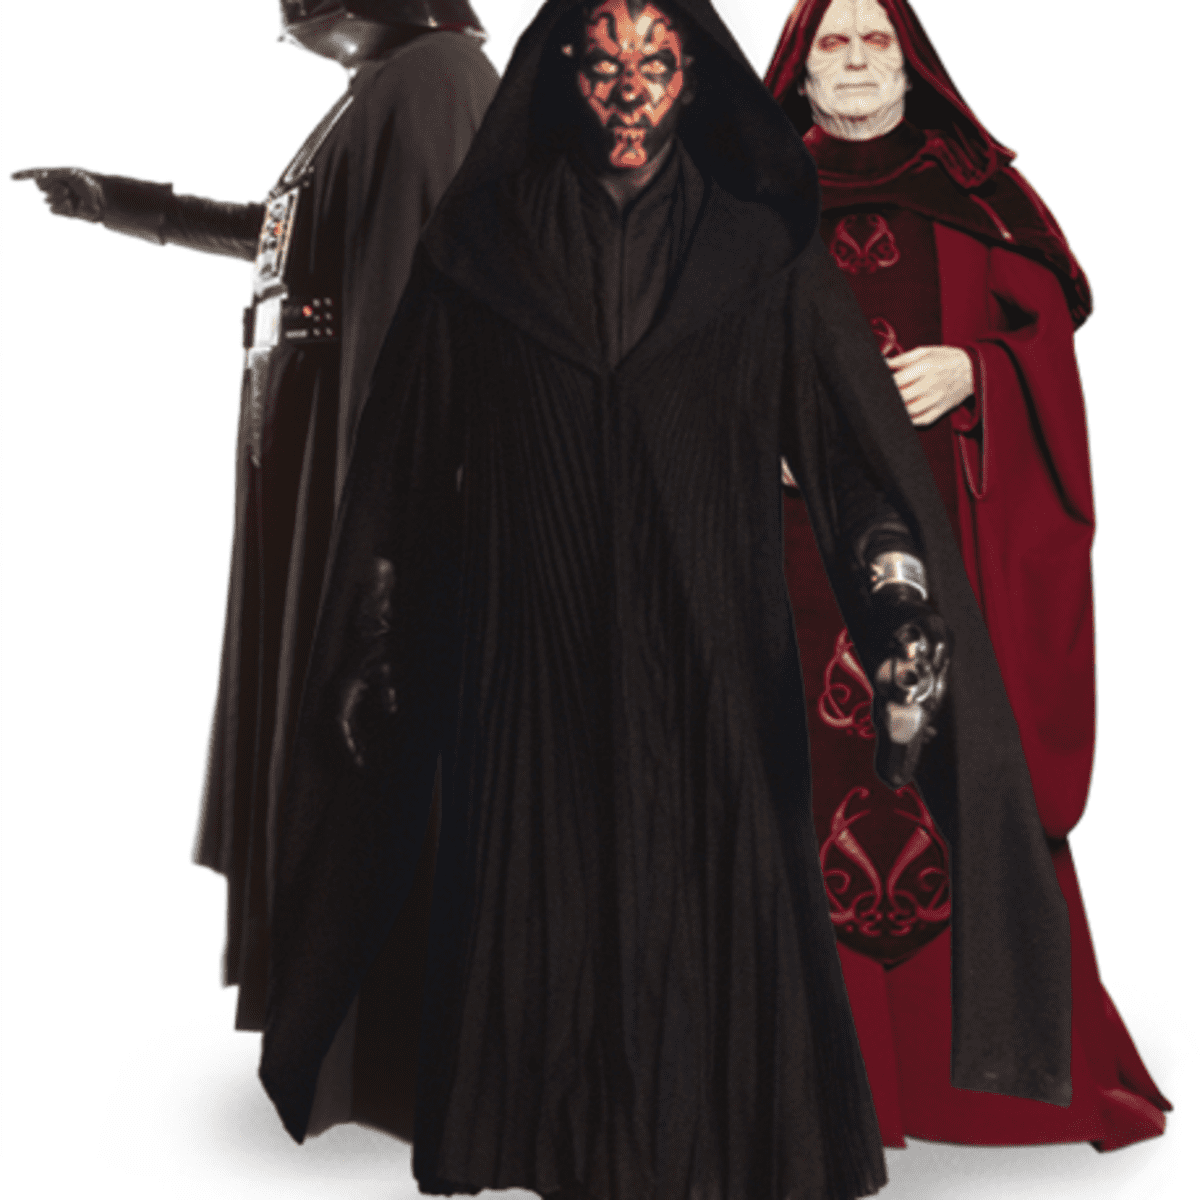 Star Wars Sith Dark Lord Darth Maul Cosplay Costume Tunic Outfit Suit.